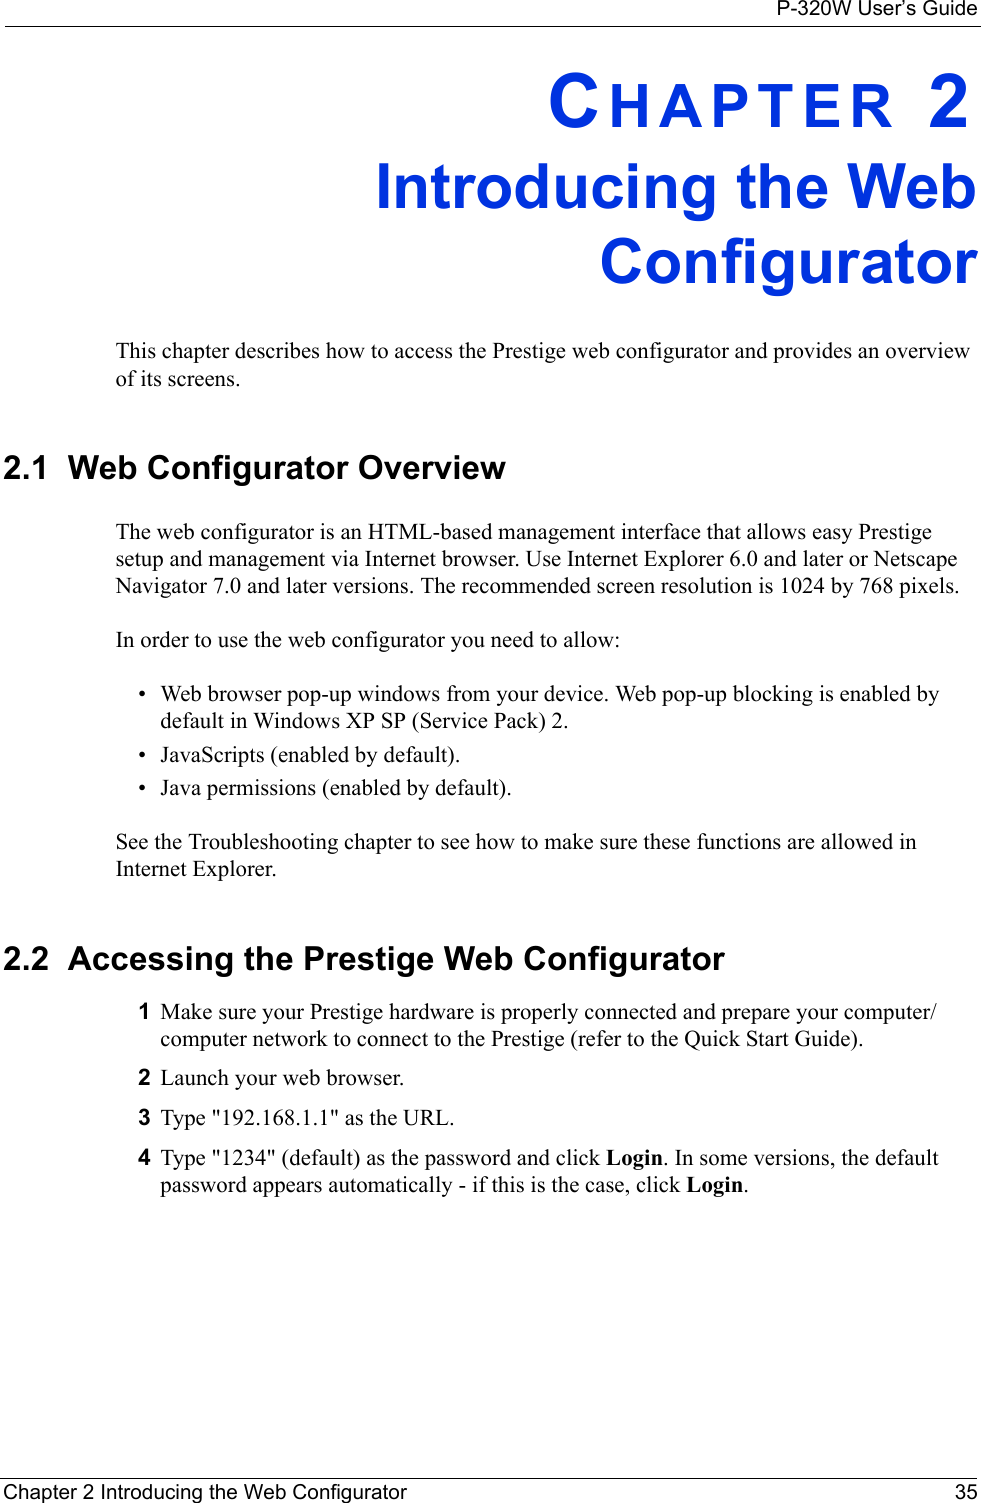 P-320W User’s GuideChapter 2 Introducing the Web Configurator 35CHAPTER 2Introducing the Web ConfiguratorThis chapter describes how to access the Prestige web configurator and provides an overview of its screens.2.1  Web Configurator OverviewThe web configurator is an HTML-based management interface that allows easy Prestige setup and management via Internet browser. Use Internet Explorer 6.0 and later or Netscape Navigator 7.0 and later versions. The recommended screen resolution is 1024 by 768 pixels.In order to use the web configurator you need to allow:• Web browser pop-up windows from your device. Web pop-up blocking is enabled by default in Windows XP SP (Service Pack) 2.• JavaScripts (enabled by default).• Java permissions (enabled by default).See the Troubleshooting chapter to see how to make sure these functions are allowed in Internet Explorer.2.2  Accessing the Prestige Web Configurator1Make sure your Prestige hardware is properly connected and prepare your computer/computer network to connect to the Prestige (refer to the Quick Start Guide).2Launch your web browser.3Type &quot;192.168.1.1&quot; as the URL.4Type &quot;1234&quot; (default) as the password and click Login. In some versions, the default password appears automatically - if this is the case, click Login.